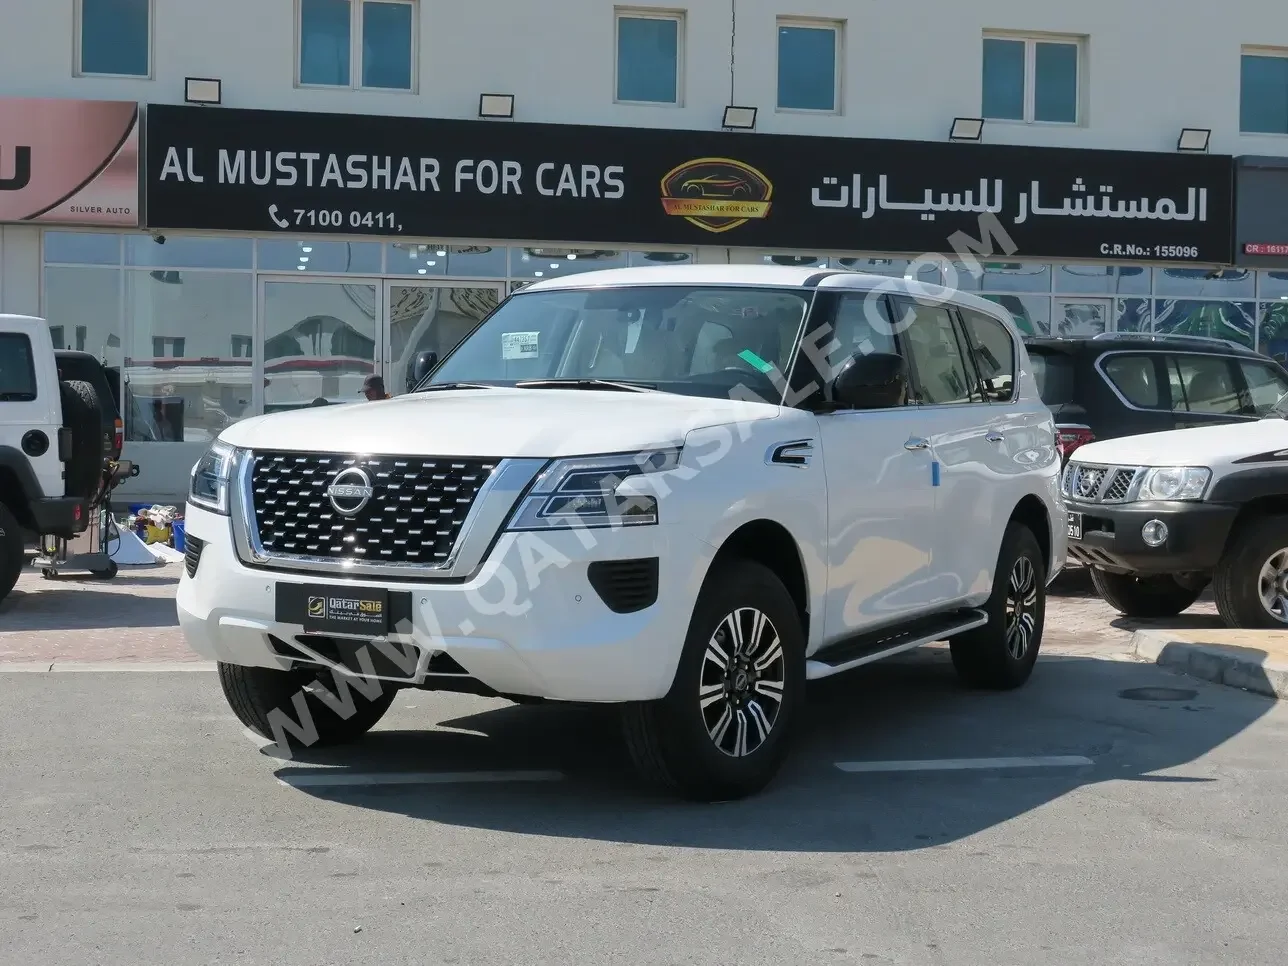  Nissan  Patrol  XE  2024  Automatic  0 Km  6 Cylinder  Four Wheel Drive (4WD)  SUV  White  With Warranty